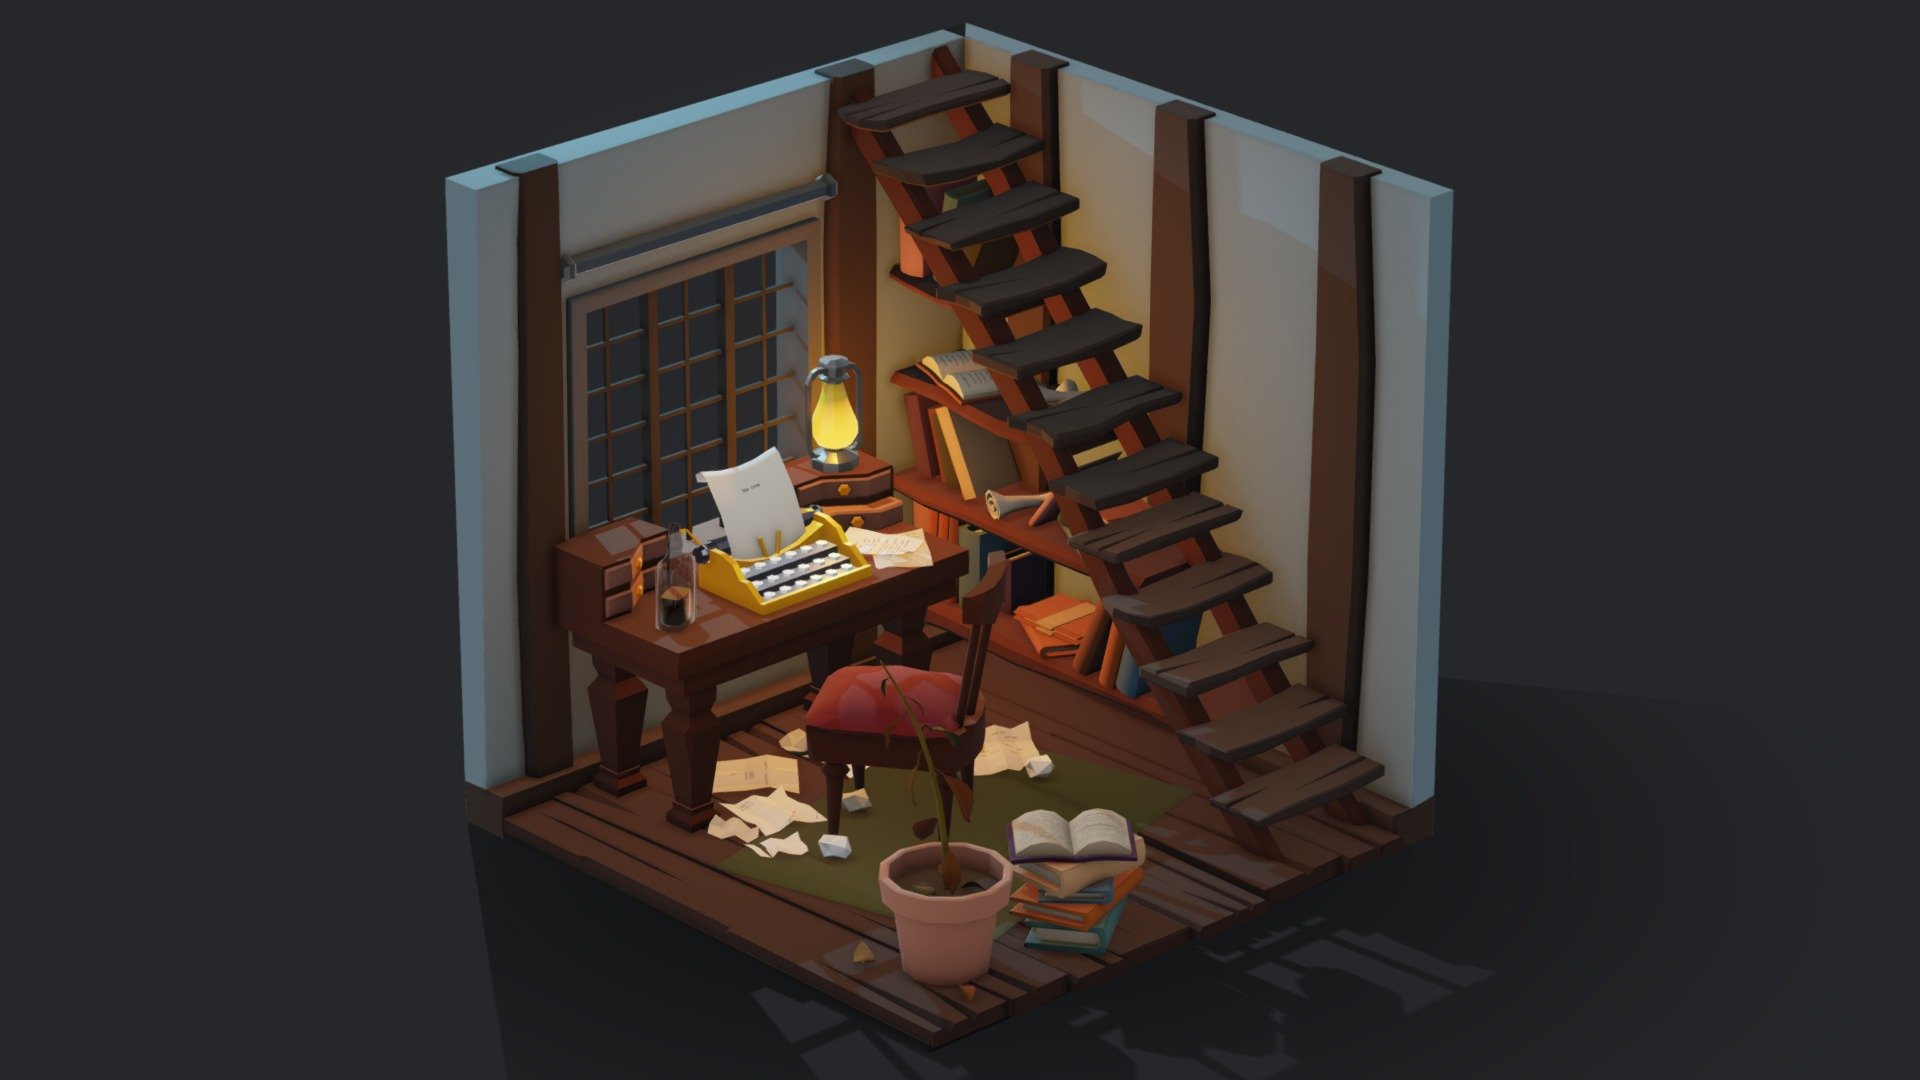 Low Poly scene created for the Isometric Room challenge. 
Passionate writer is trying to write his first poem!
I wanted to practice storytelling, model creates in 3Ds Max and textured in Substance Painter 3d model